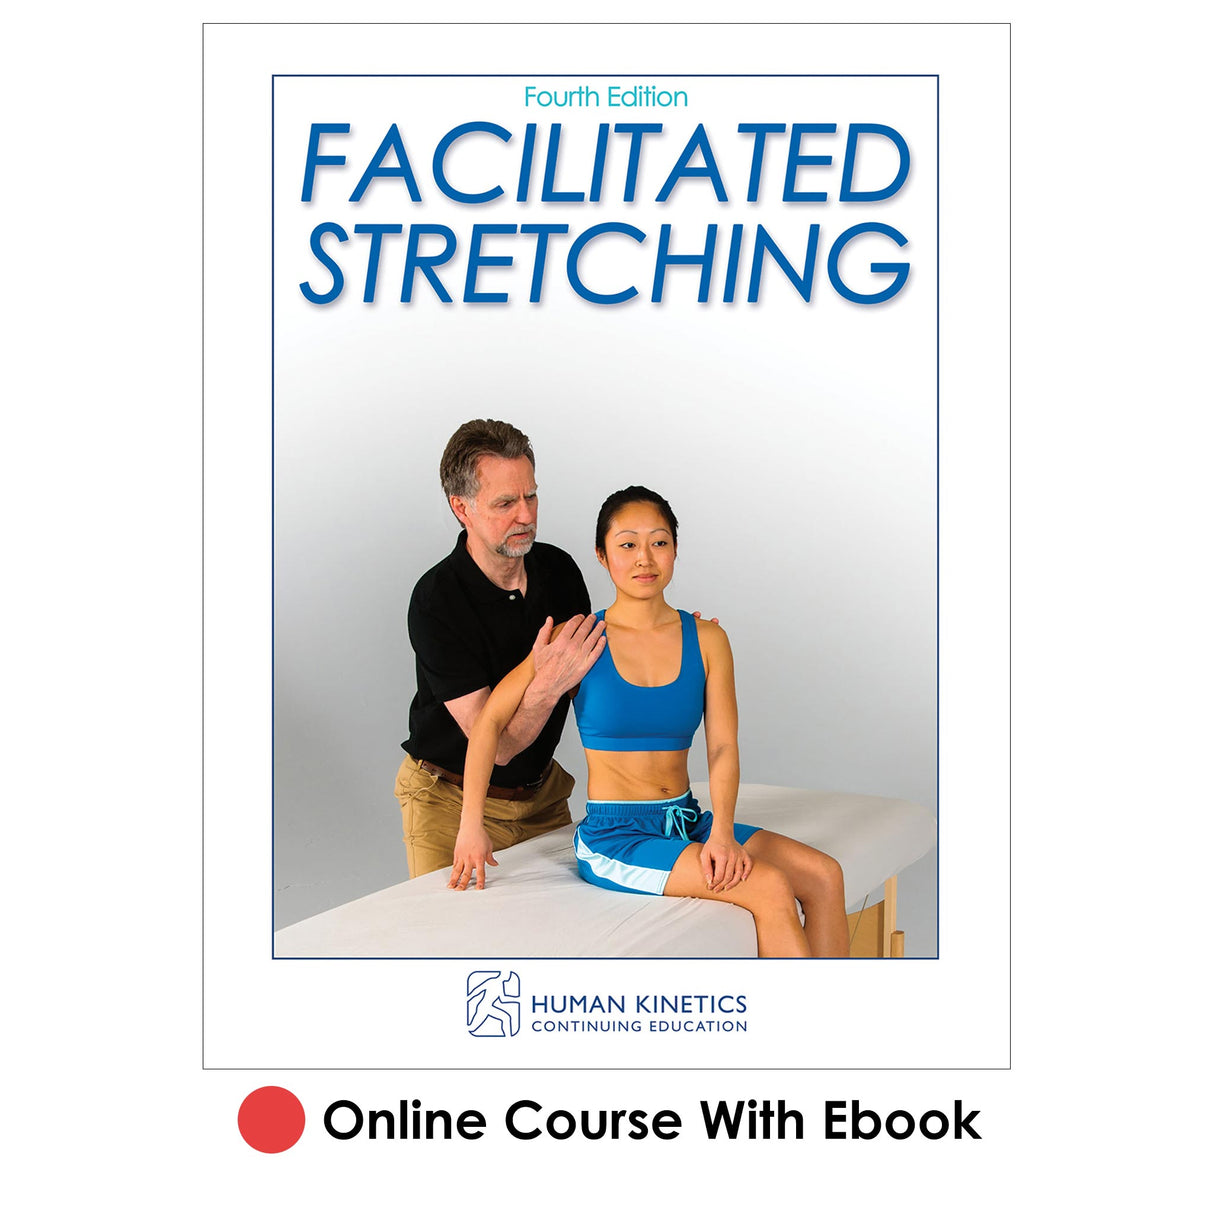 Facilitated Stretching 4th Edition Online CE Course With Ebook